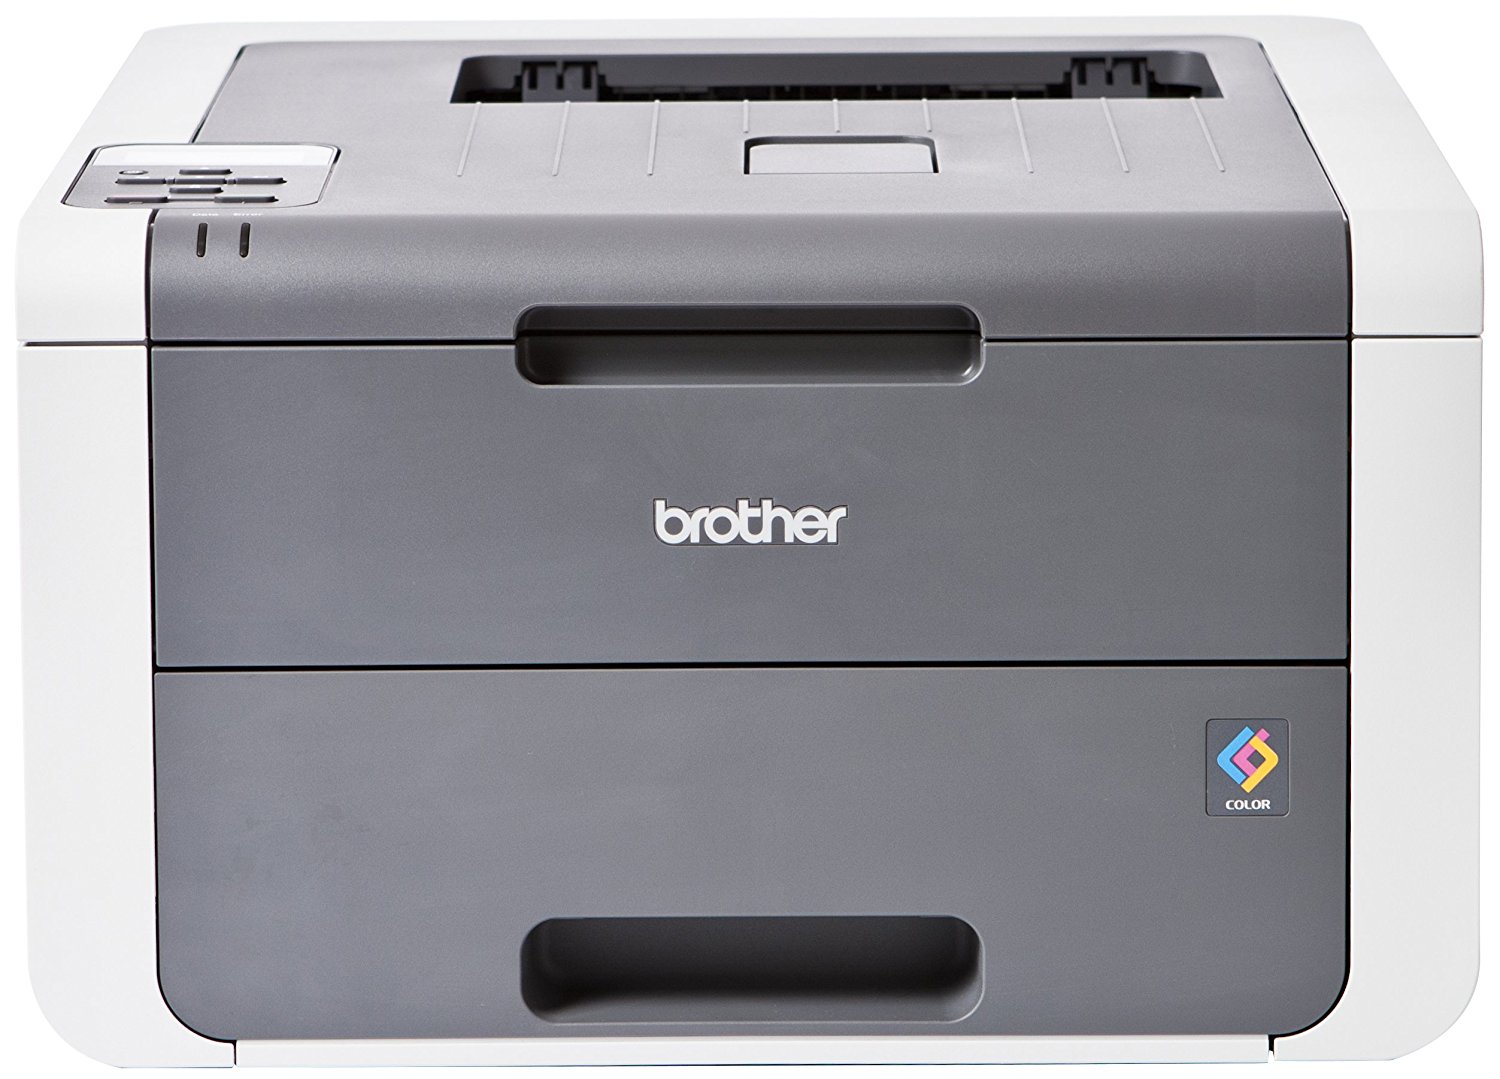 Brother Hl 5250dn Windows 10 Driver Brother Hl L23210 Driver Download For Windows 10 64 Bit We Have The Best Driver Updater Software Driver Easy Which Can Offer Whatever Drivers You Need